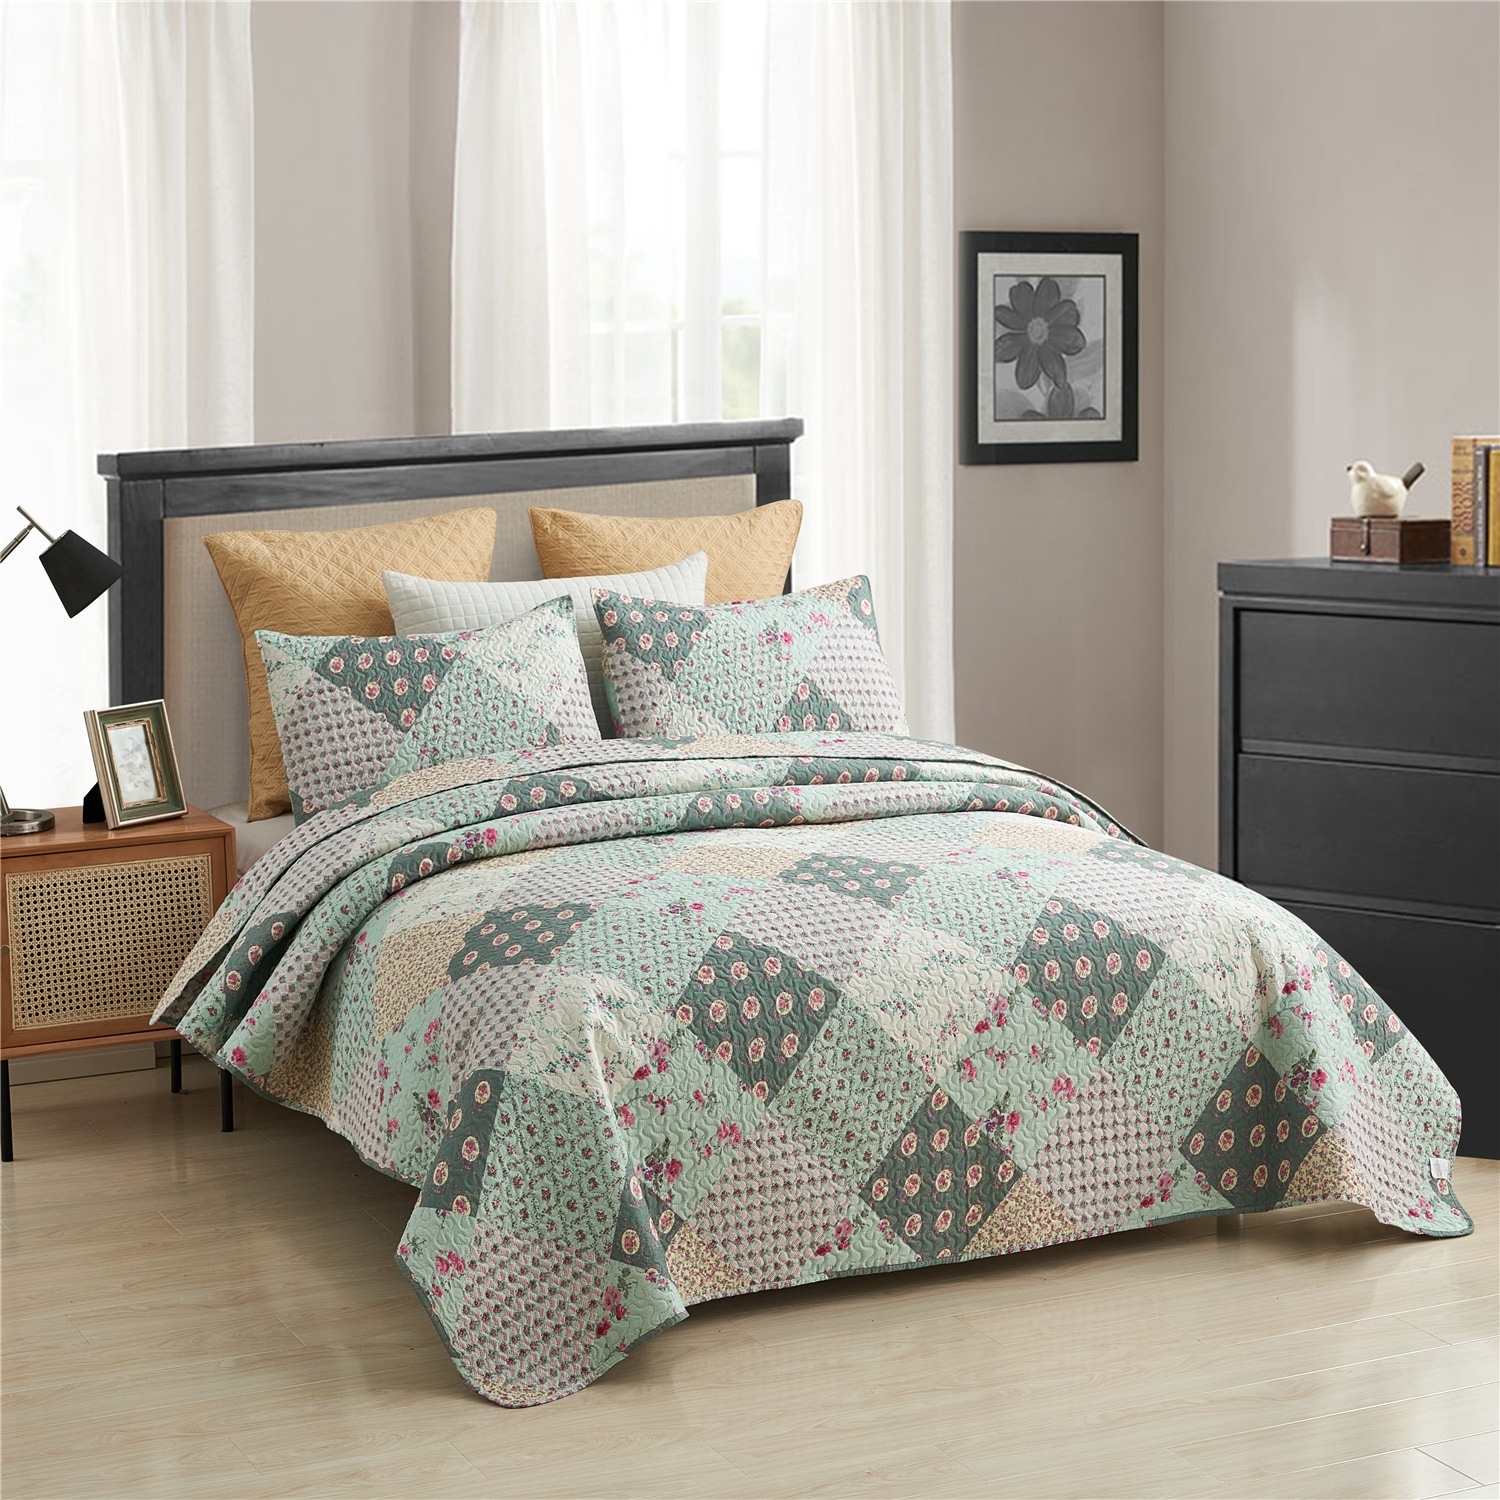 King Size Patchwork Quilts and Bedspreads - Bed Bath & Beyond